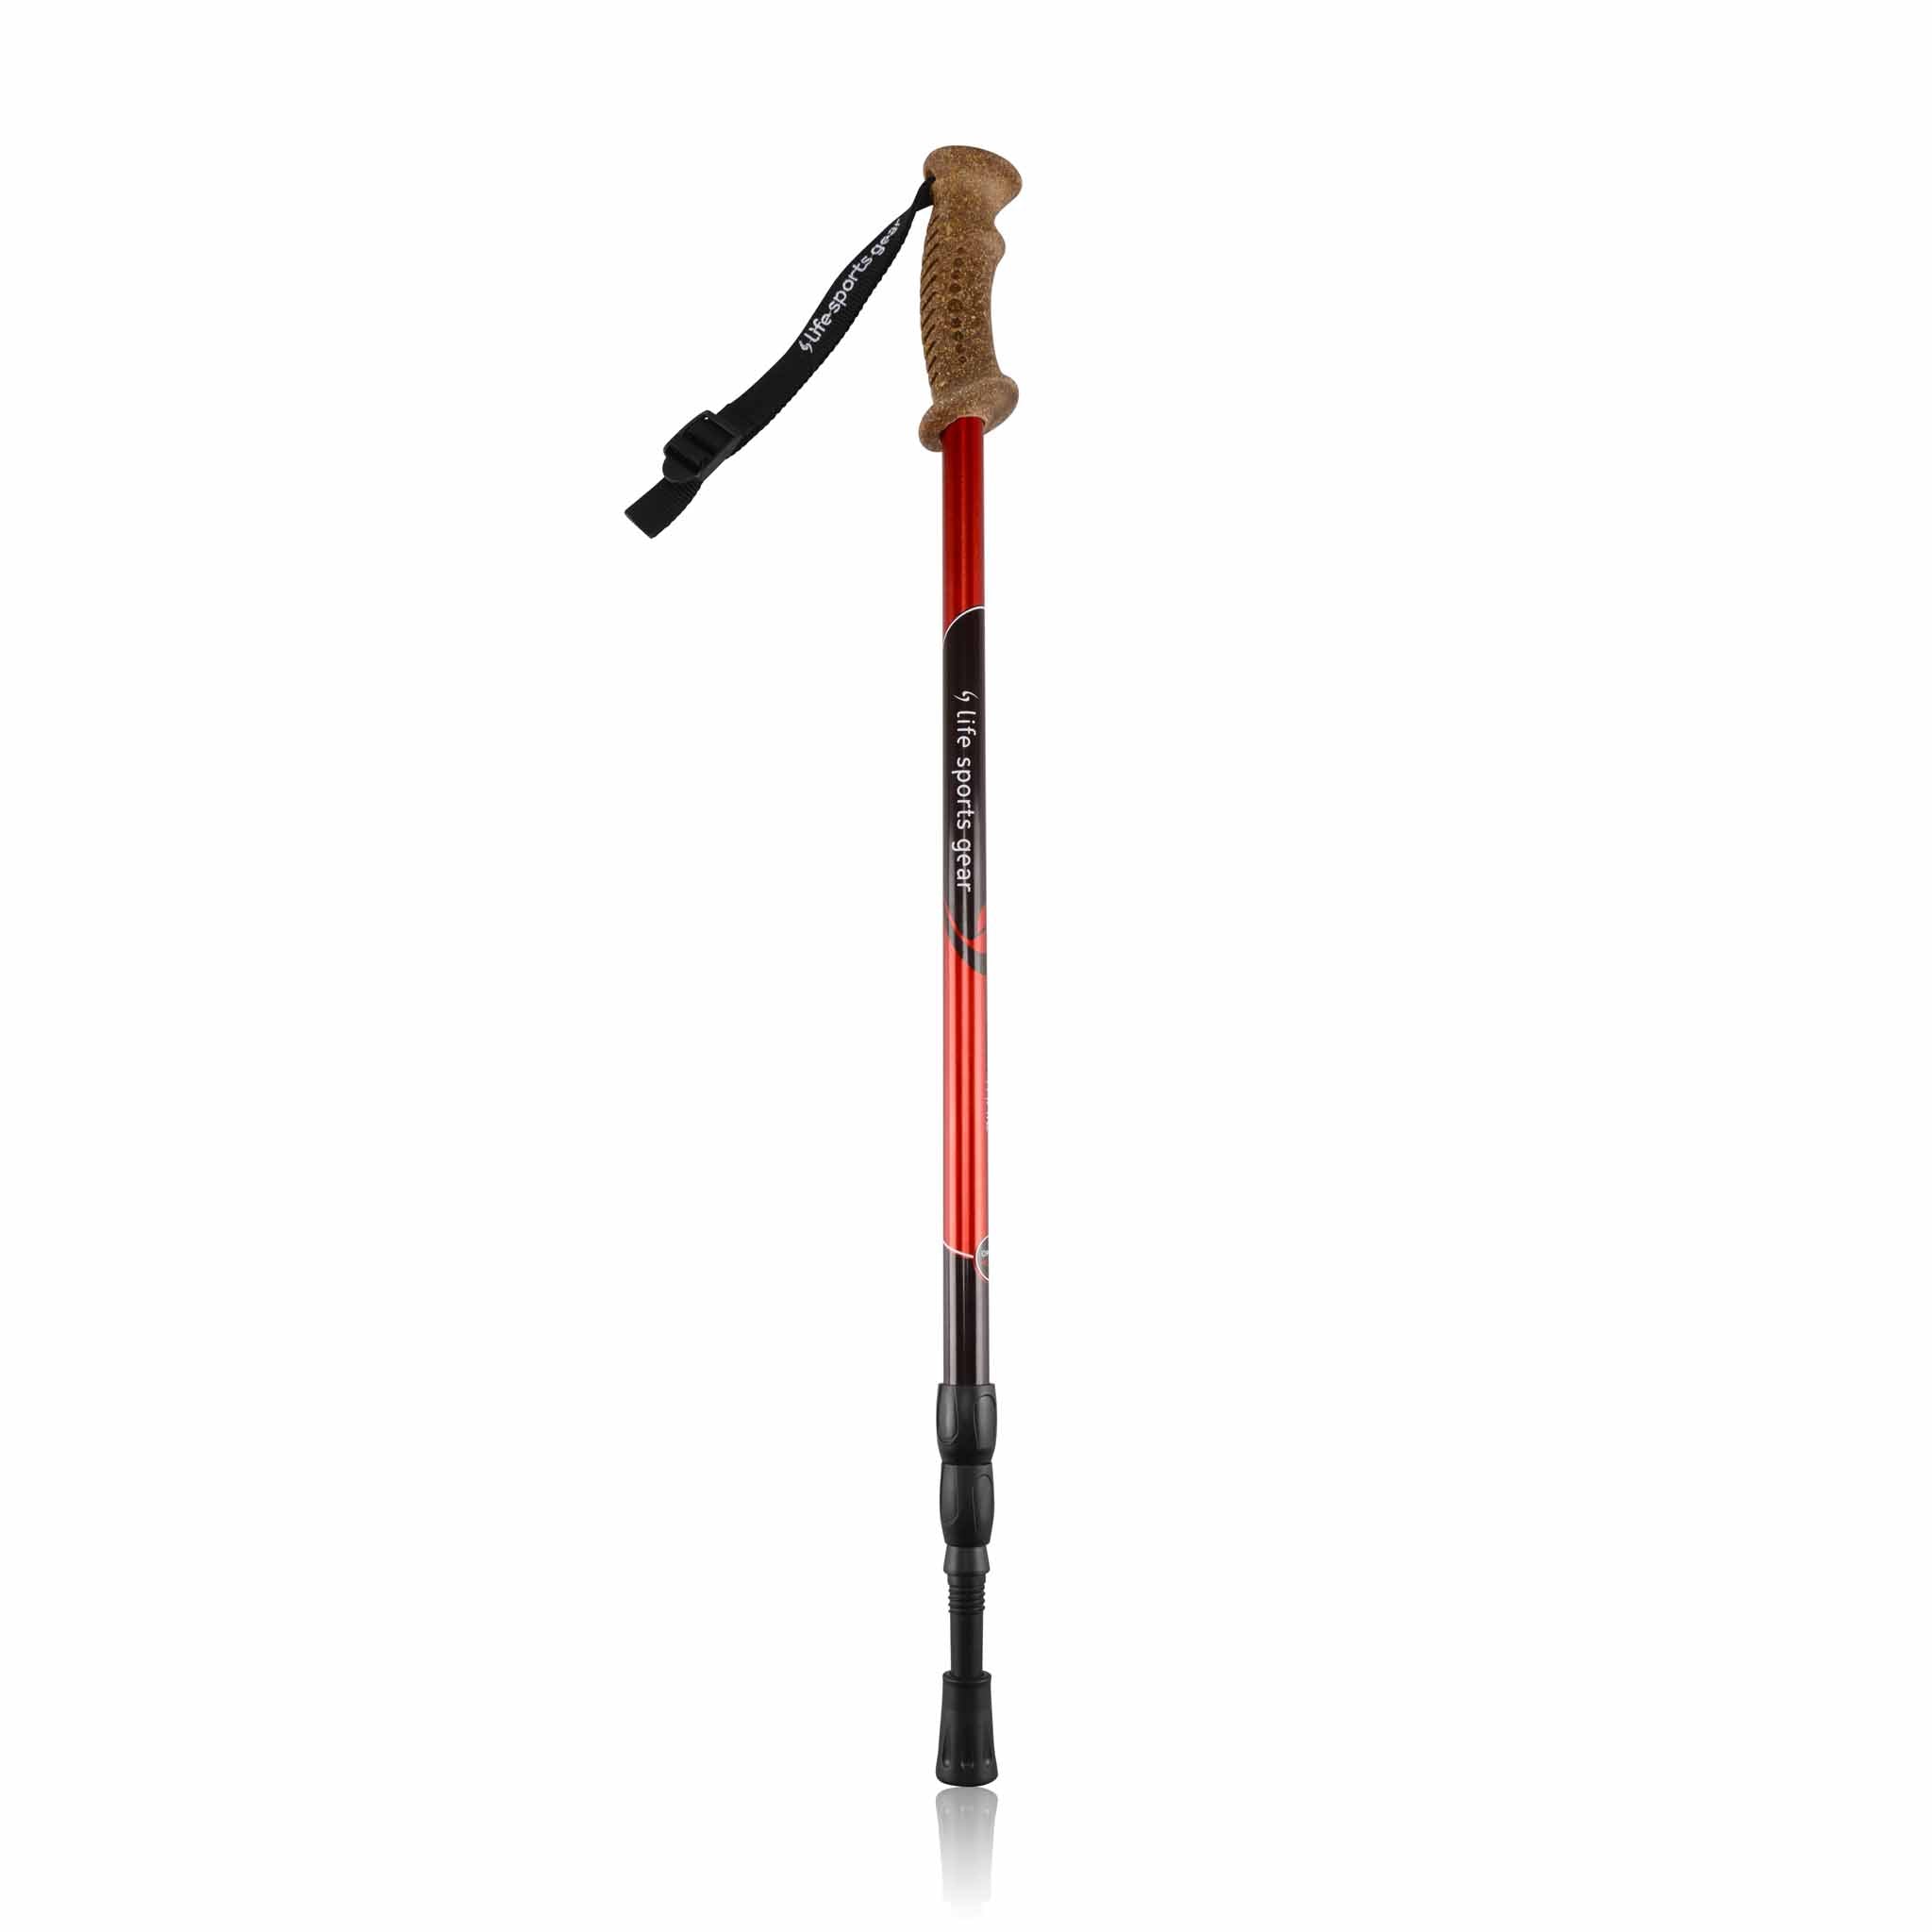 LIFE SPORTS GEAR Easy Trail Hiking Poles in Aluminum with Cork Grip,  Adjustable Lightweight Trekking Poles with Inner Lock Mechanism